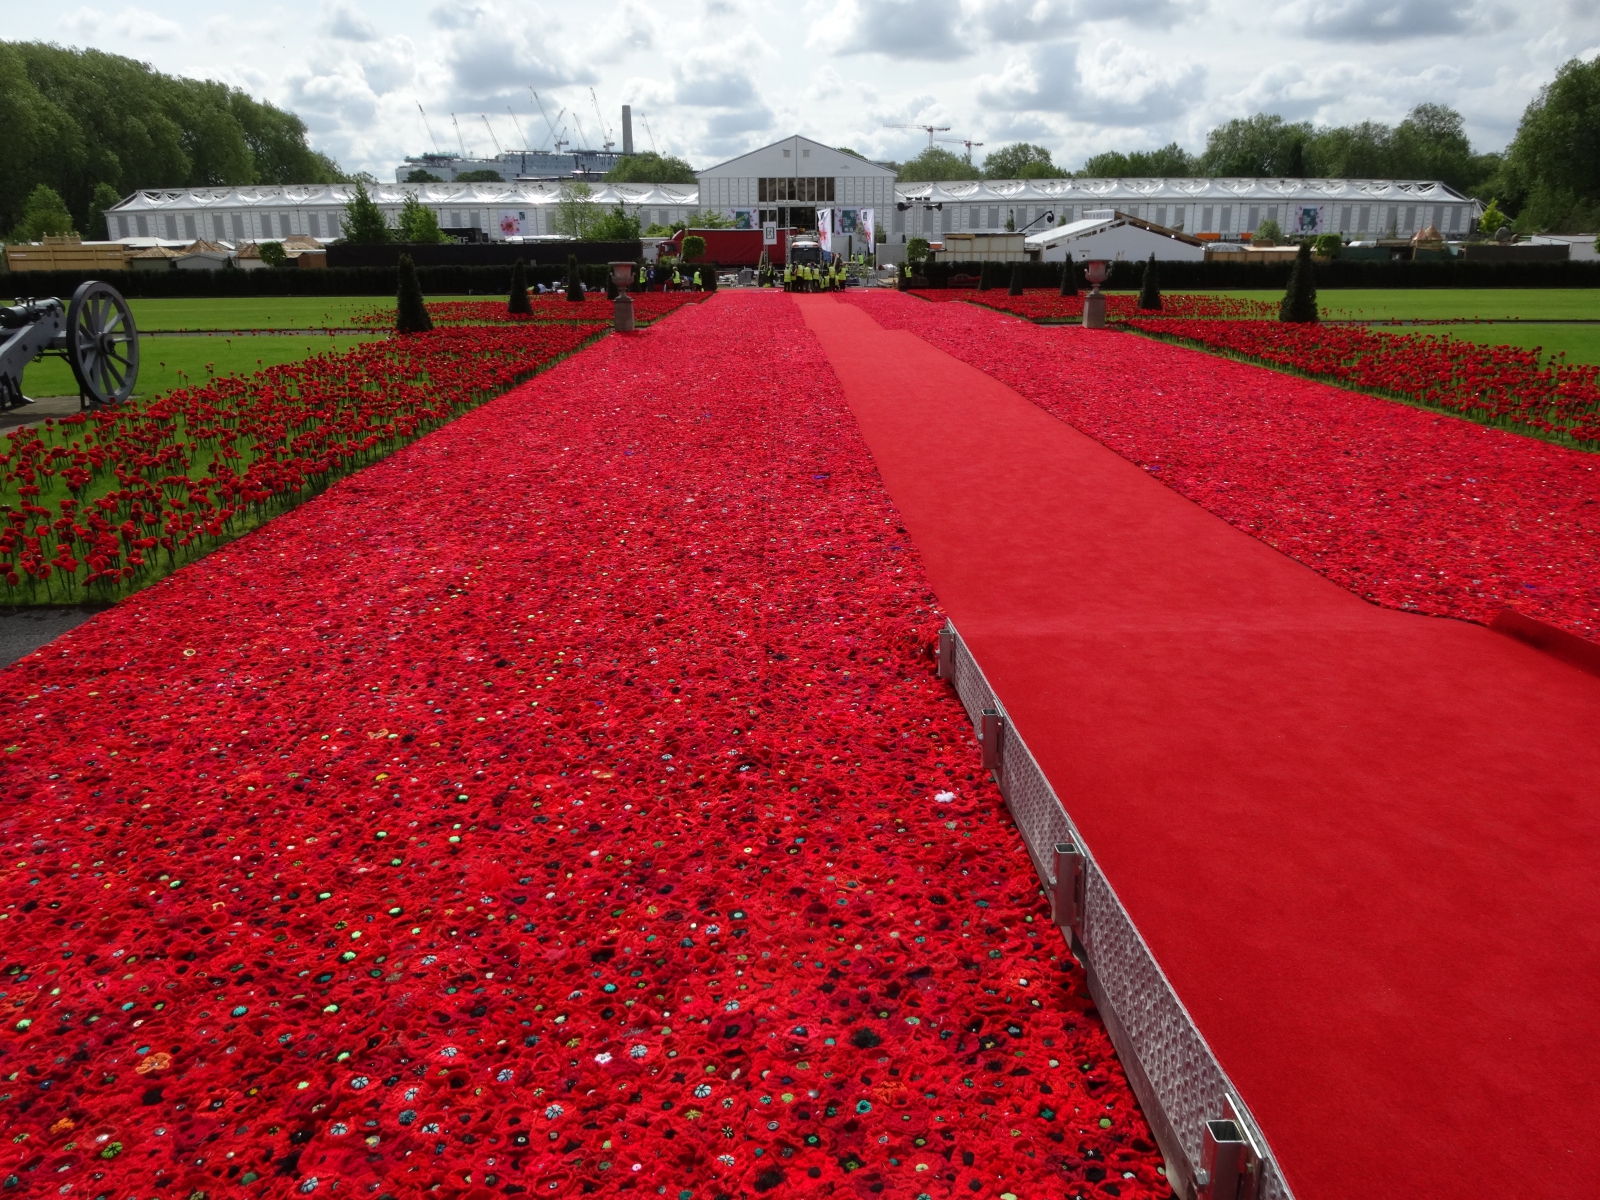 photo - red carpet walkway surrounded by knitted poppies